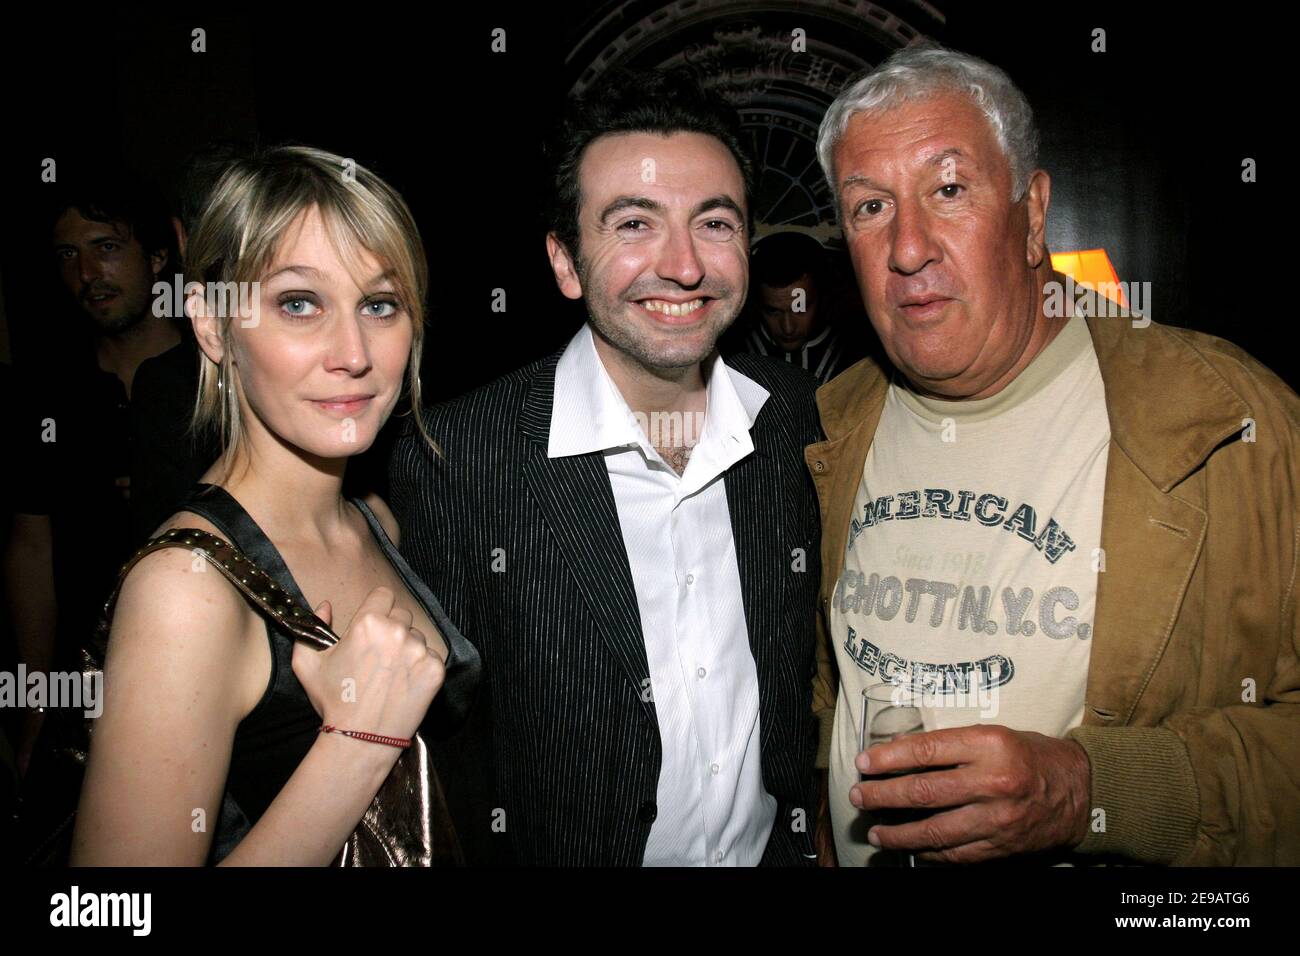 Gerald Dahan, his girlfriend and Stephane Collaro attend a party to celebrate the Raphael Mezrahi's birthday at L'Etoile in Paris, France on June 12, 2006. Photo by Benoit Pinguet/ABACAPRESS.COM. Stock Photo